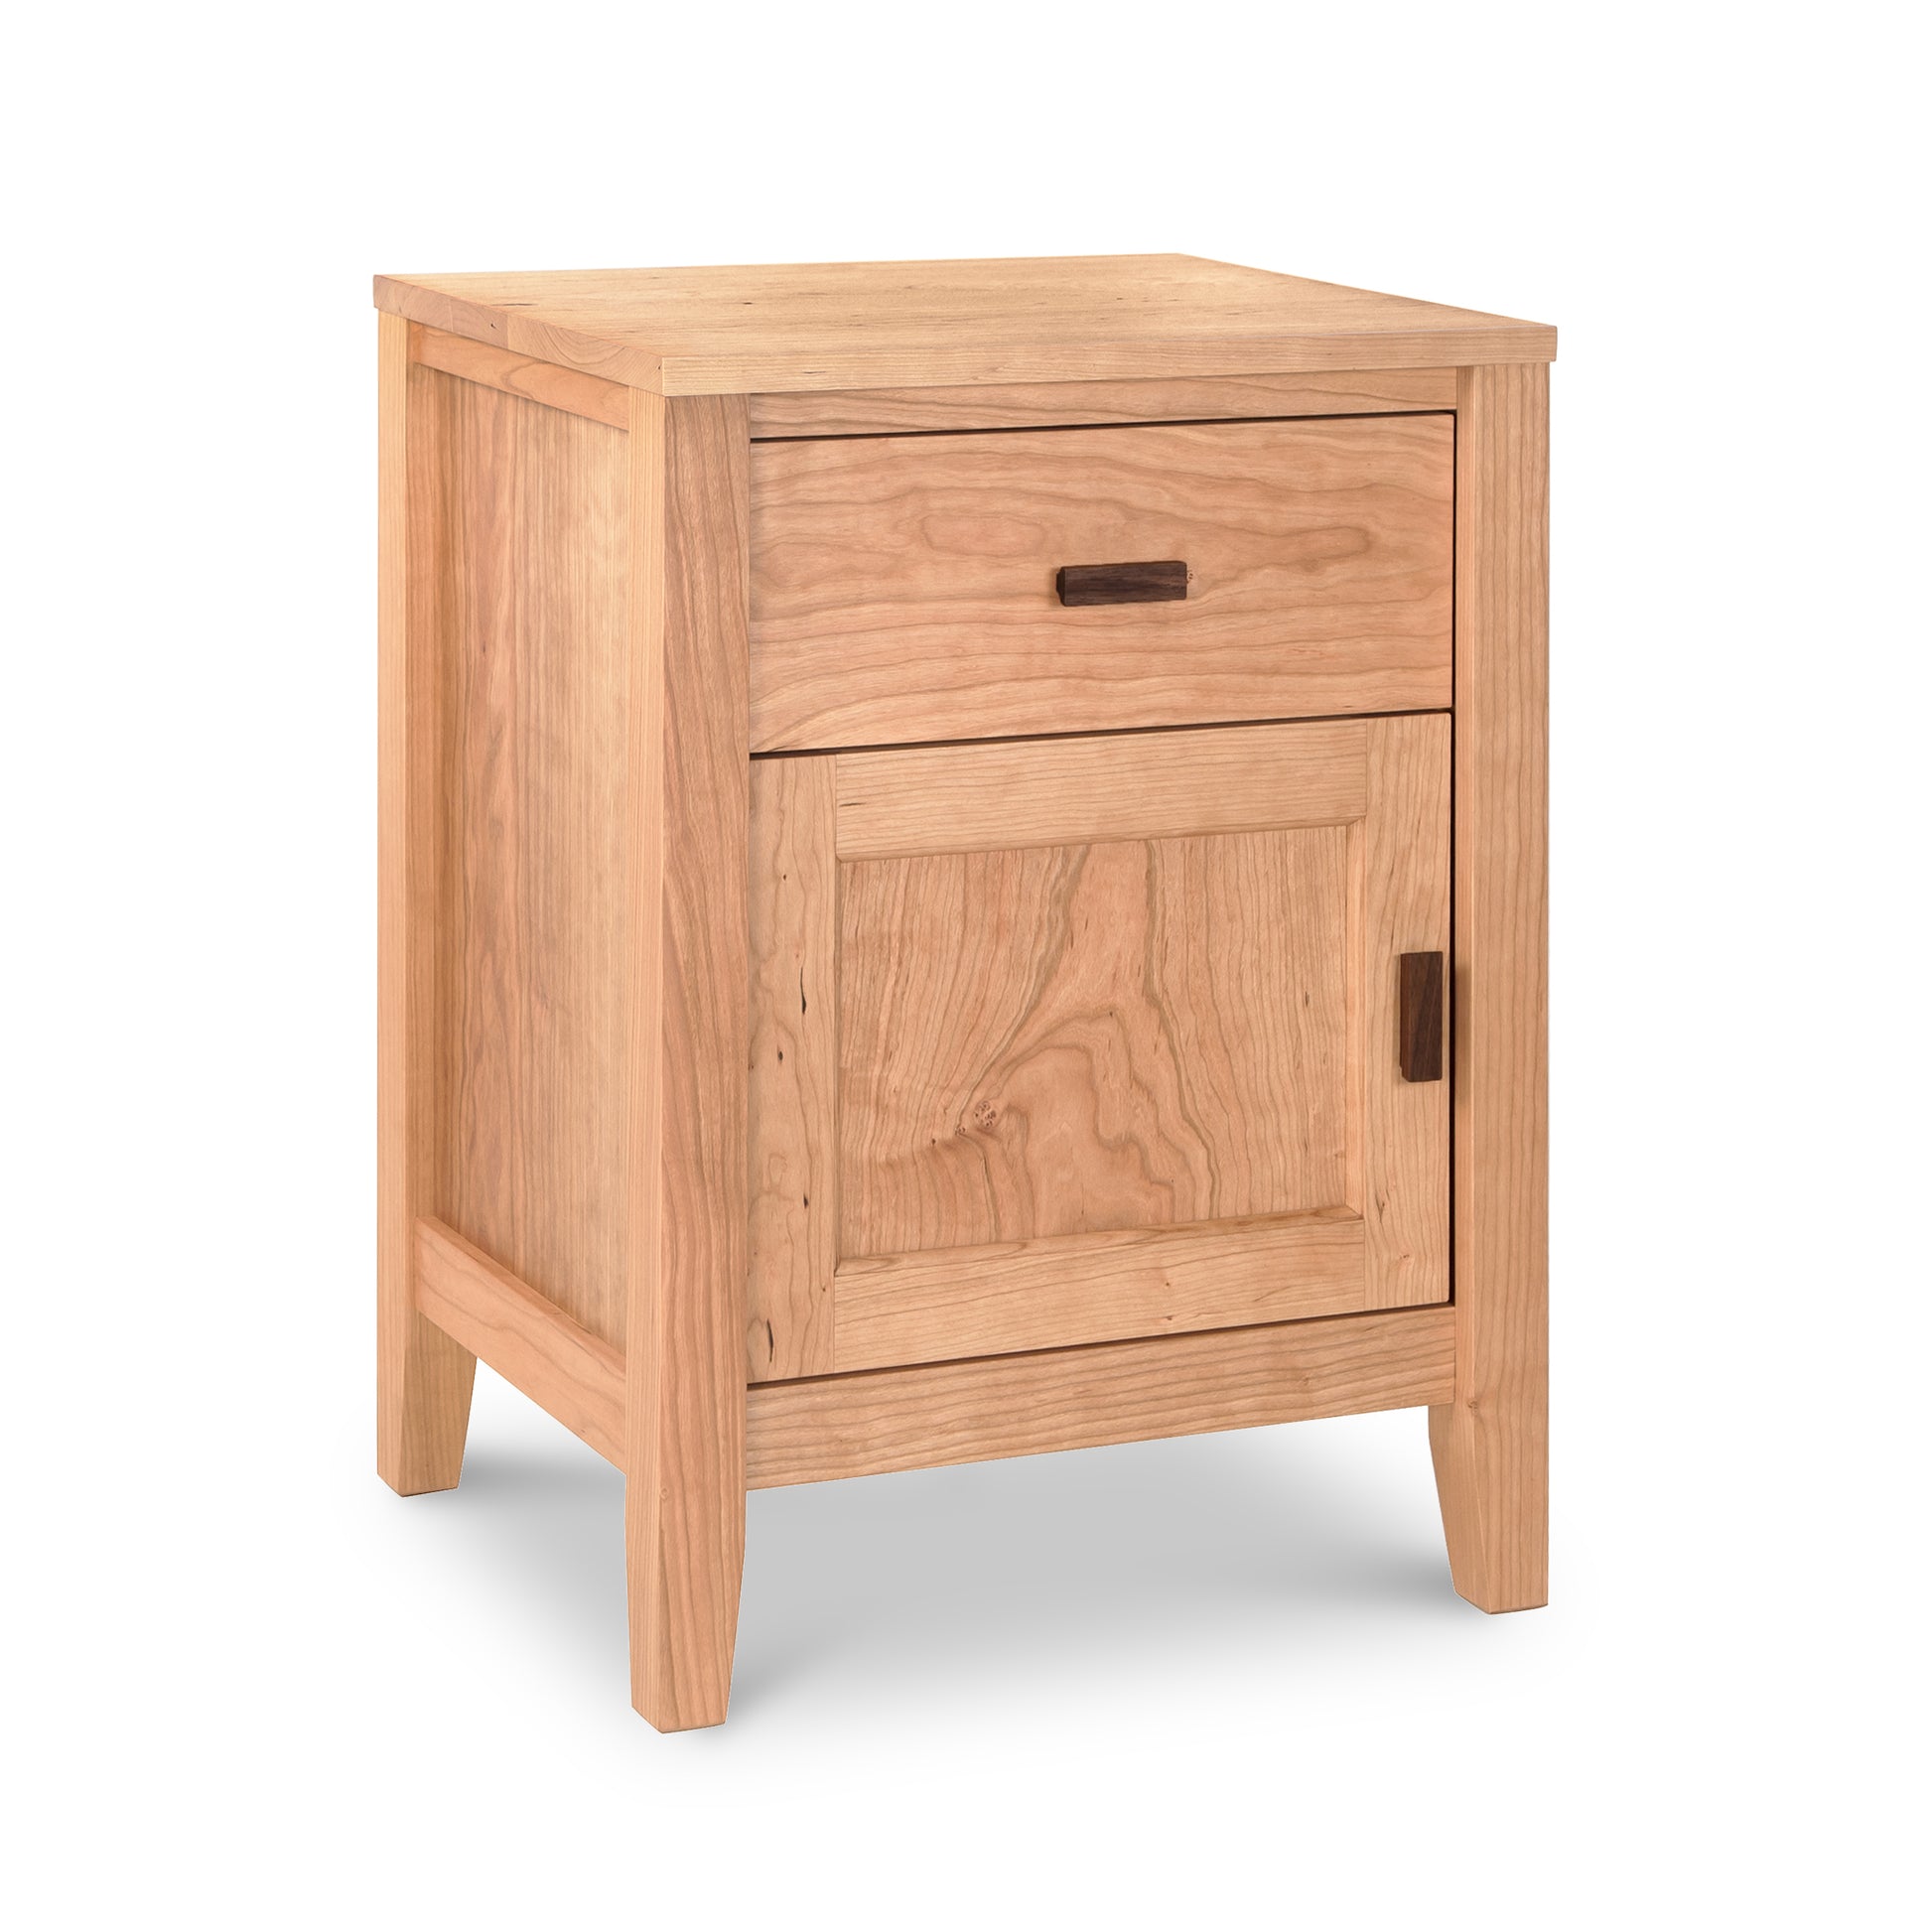 A small Andover Modern 1-Drawer Nightstand with Door by Maple Corner Woodworks.